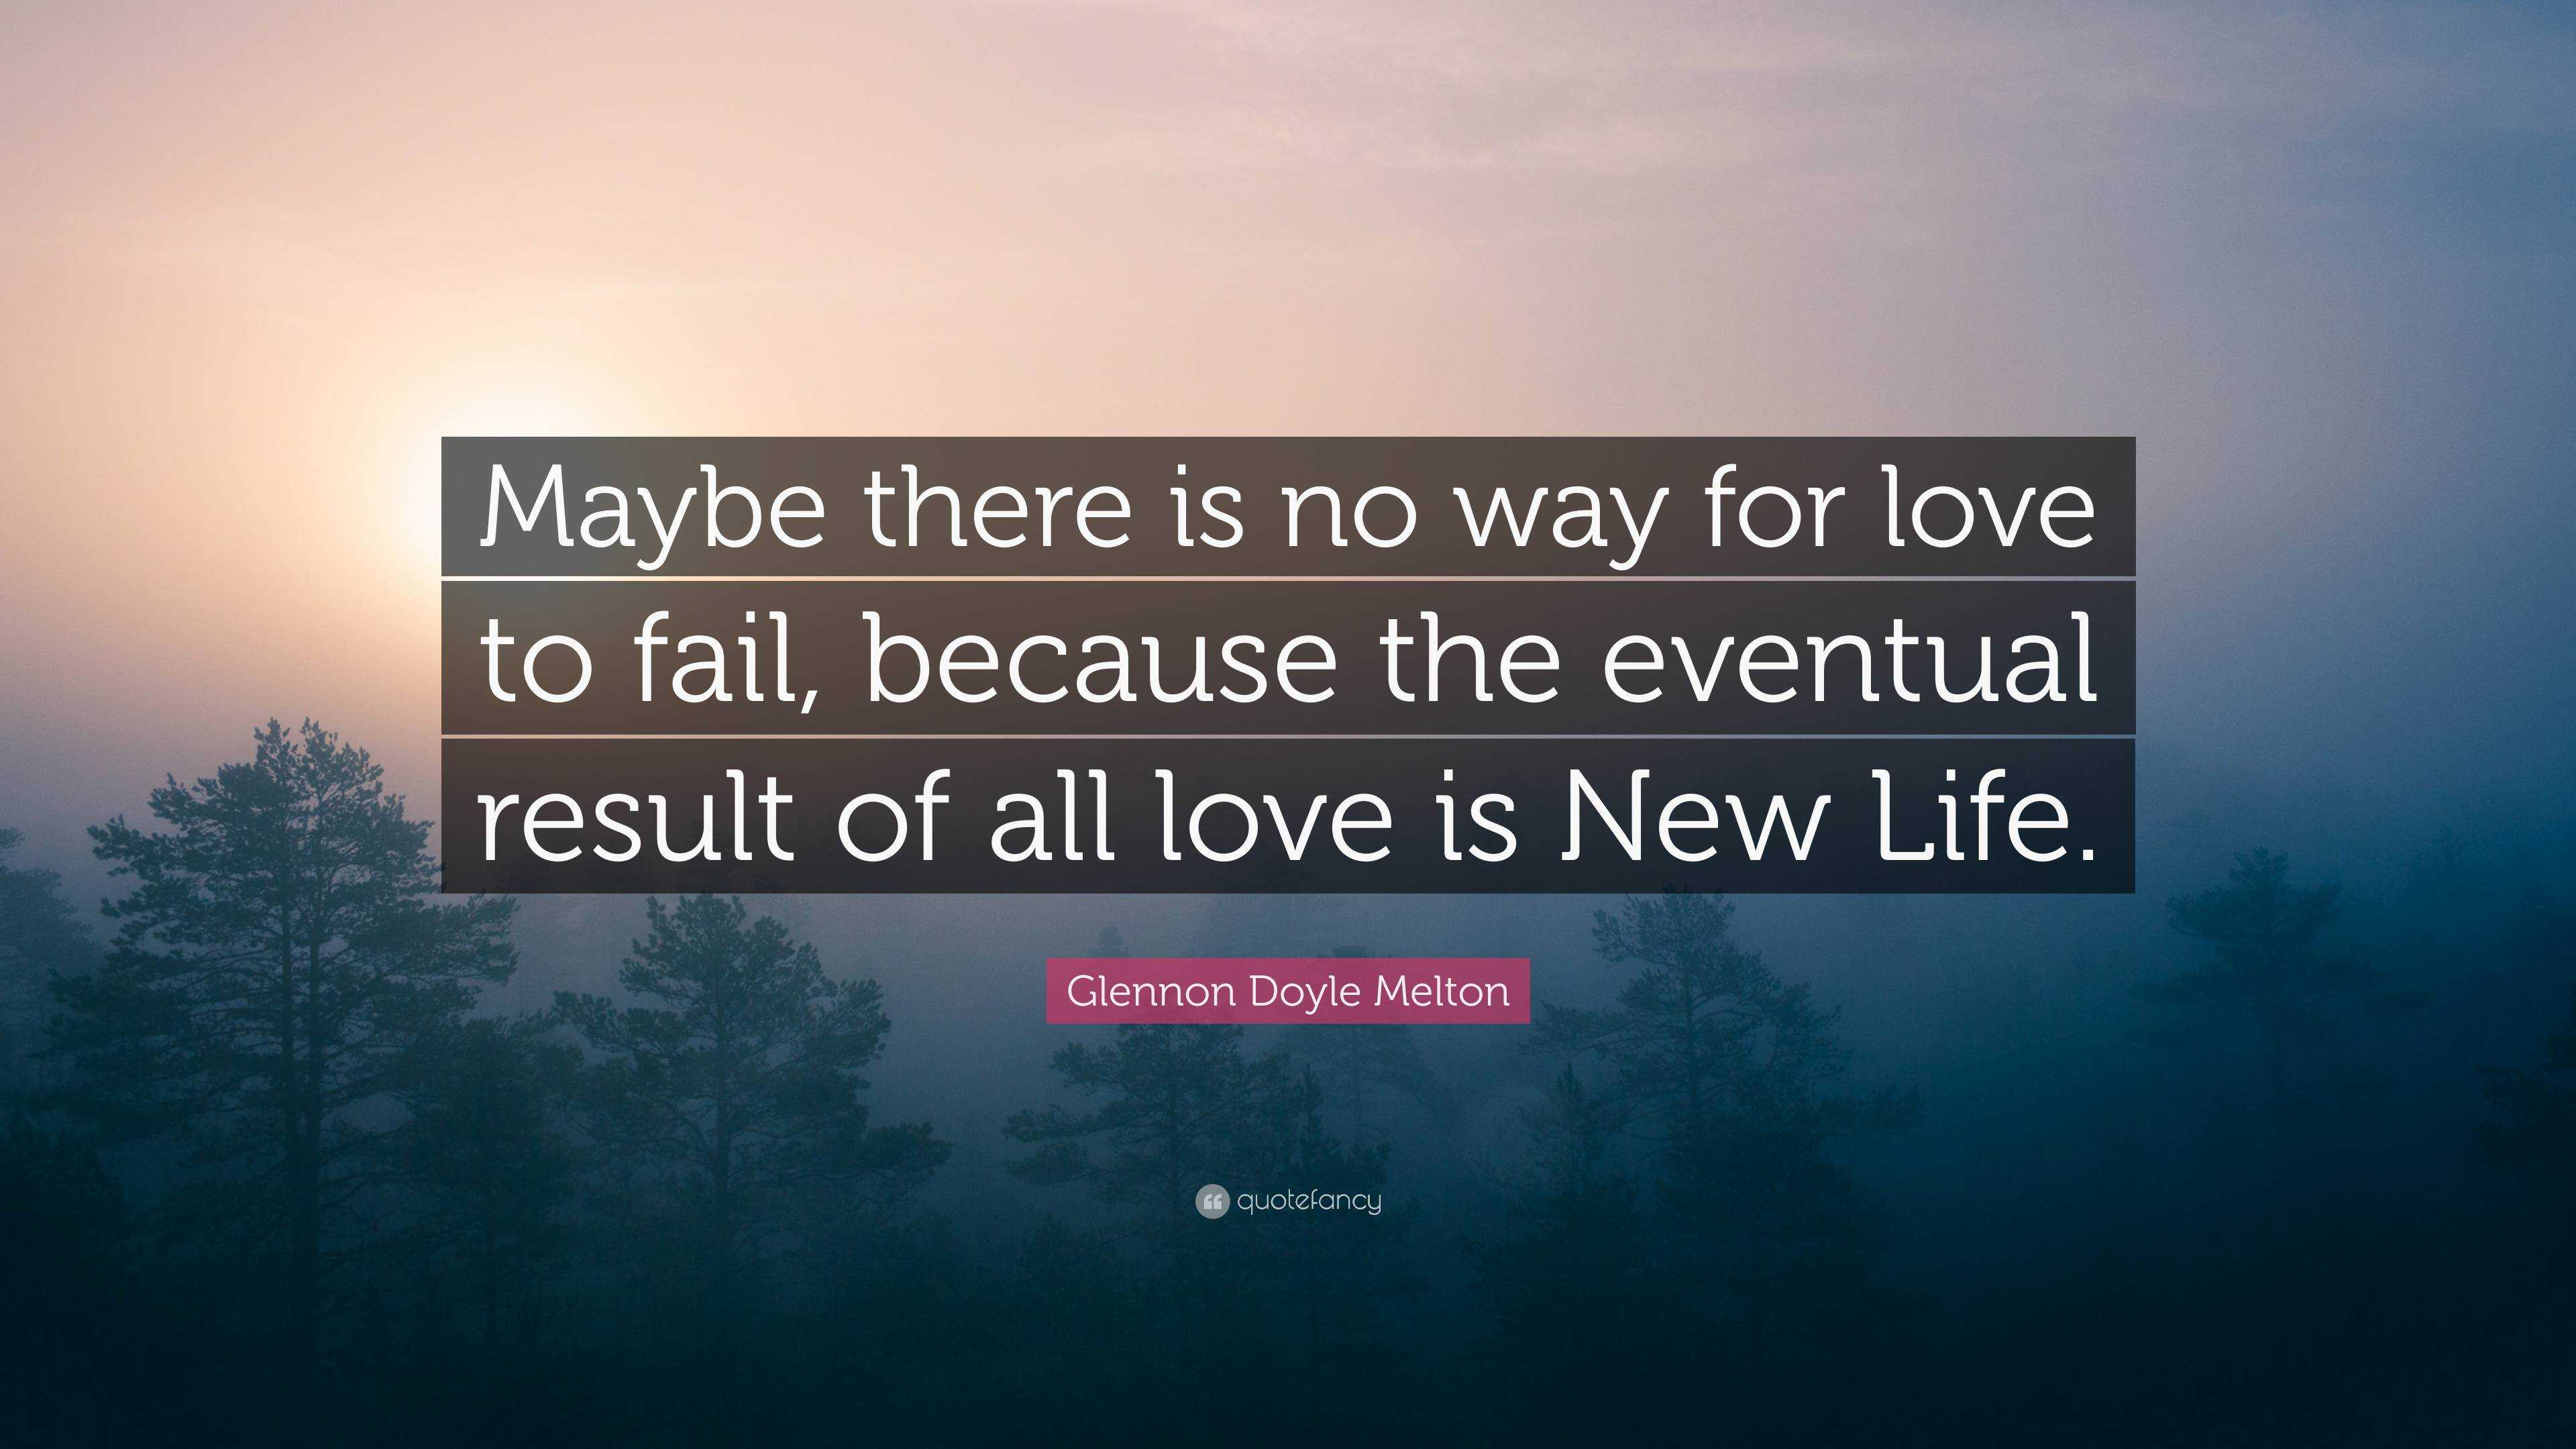 Glennon Doyle Melton Quote: “Maybe there is no way for love to fail ...